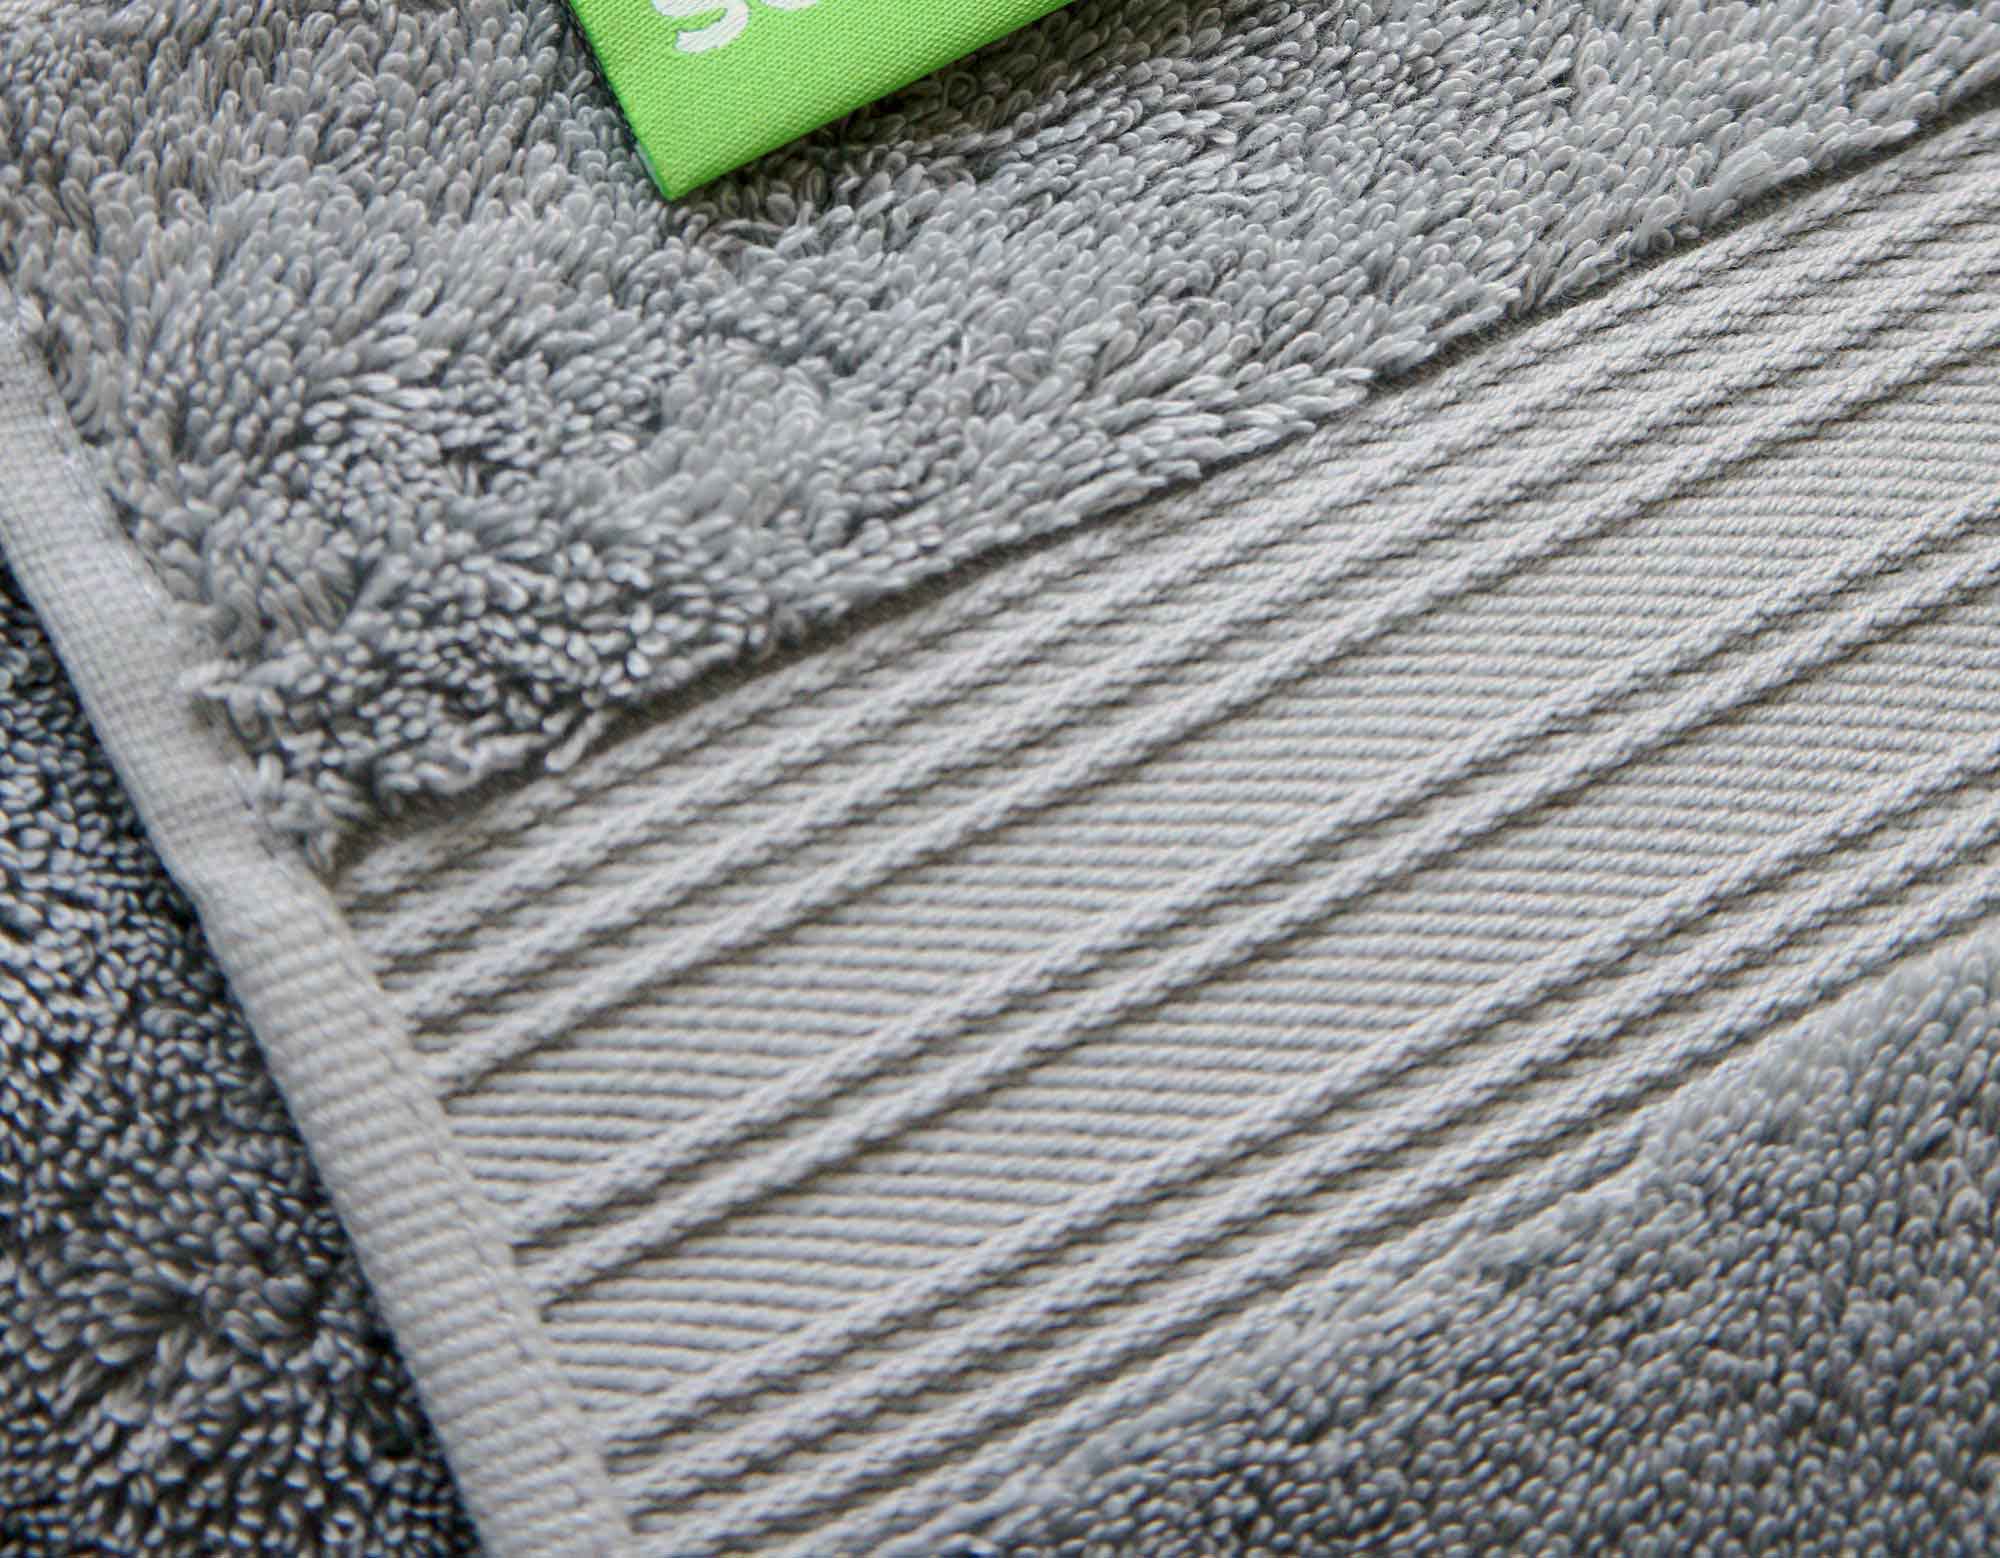 Silver grey cotton sheet close-up showing details and scooms logo